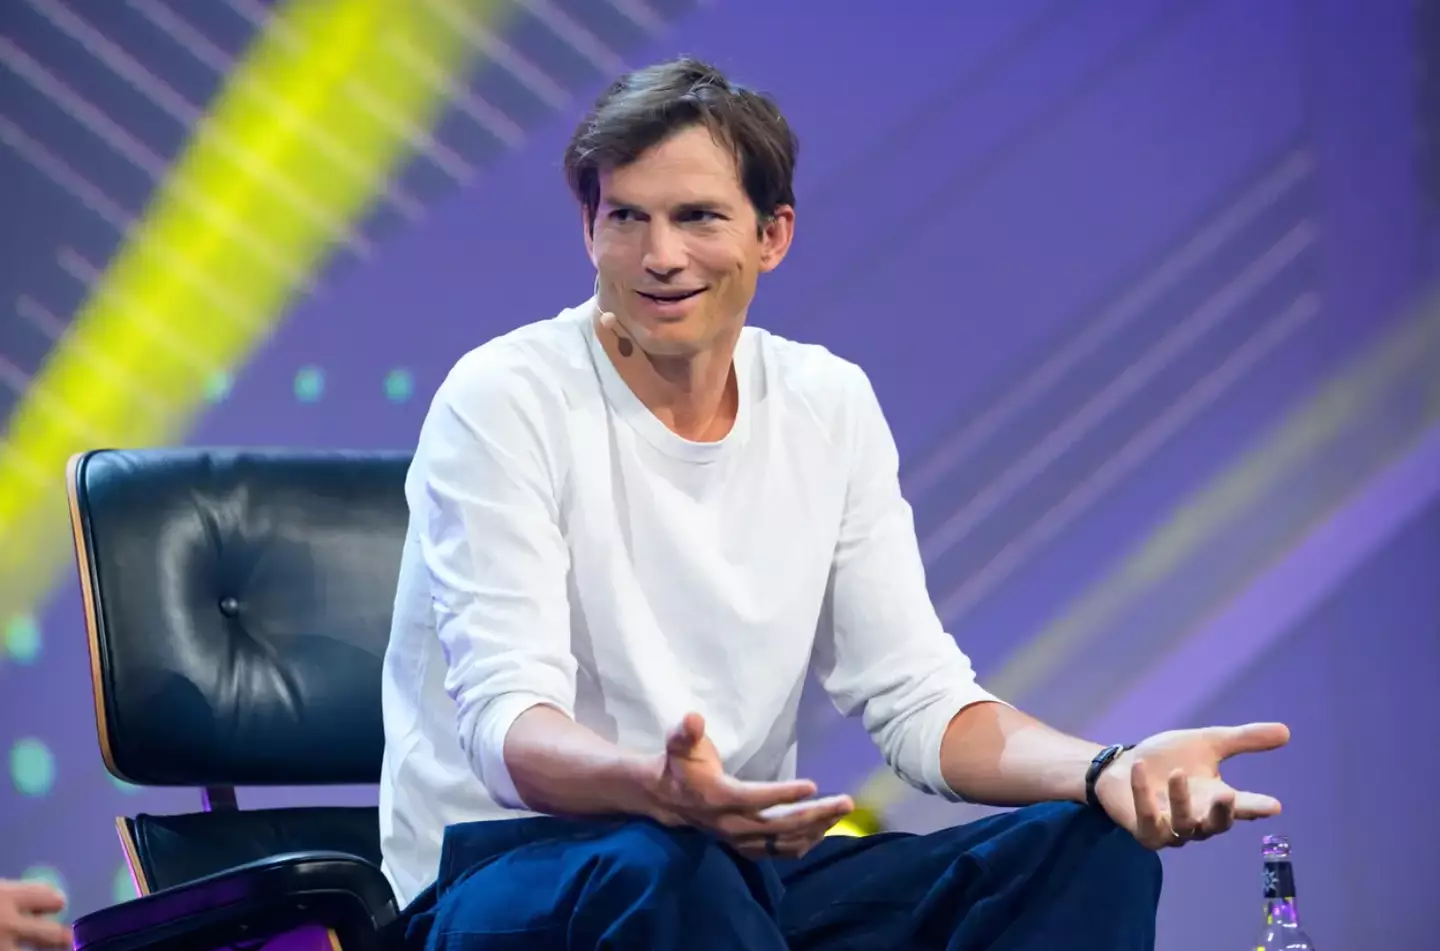 Kutcher opened up about his battle with a rare disease.